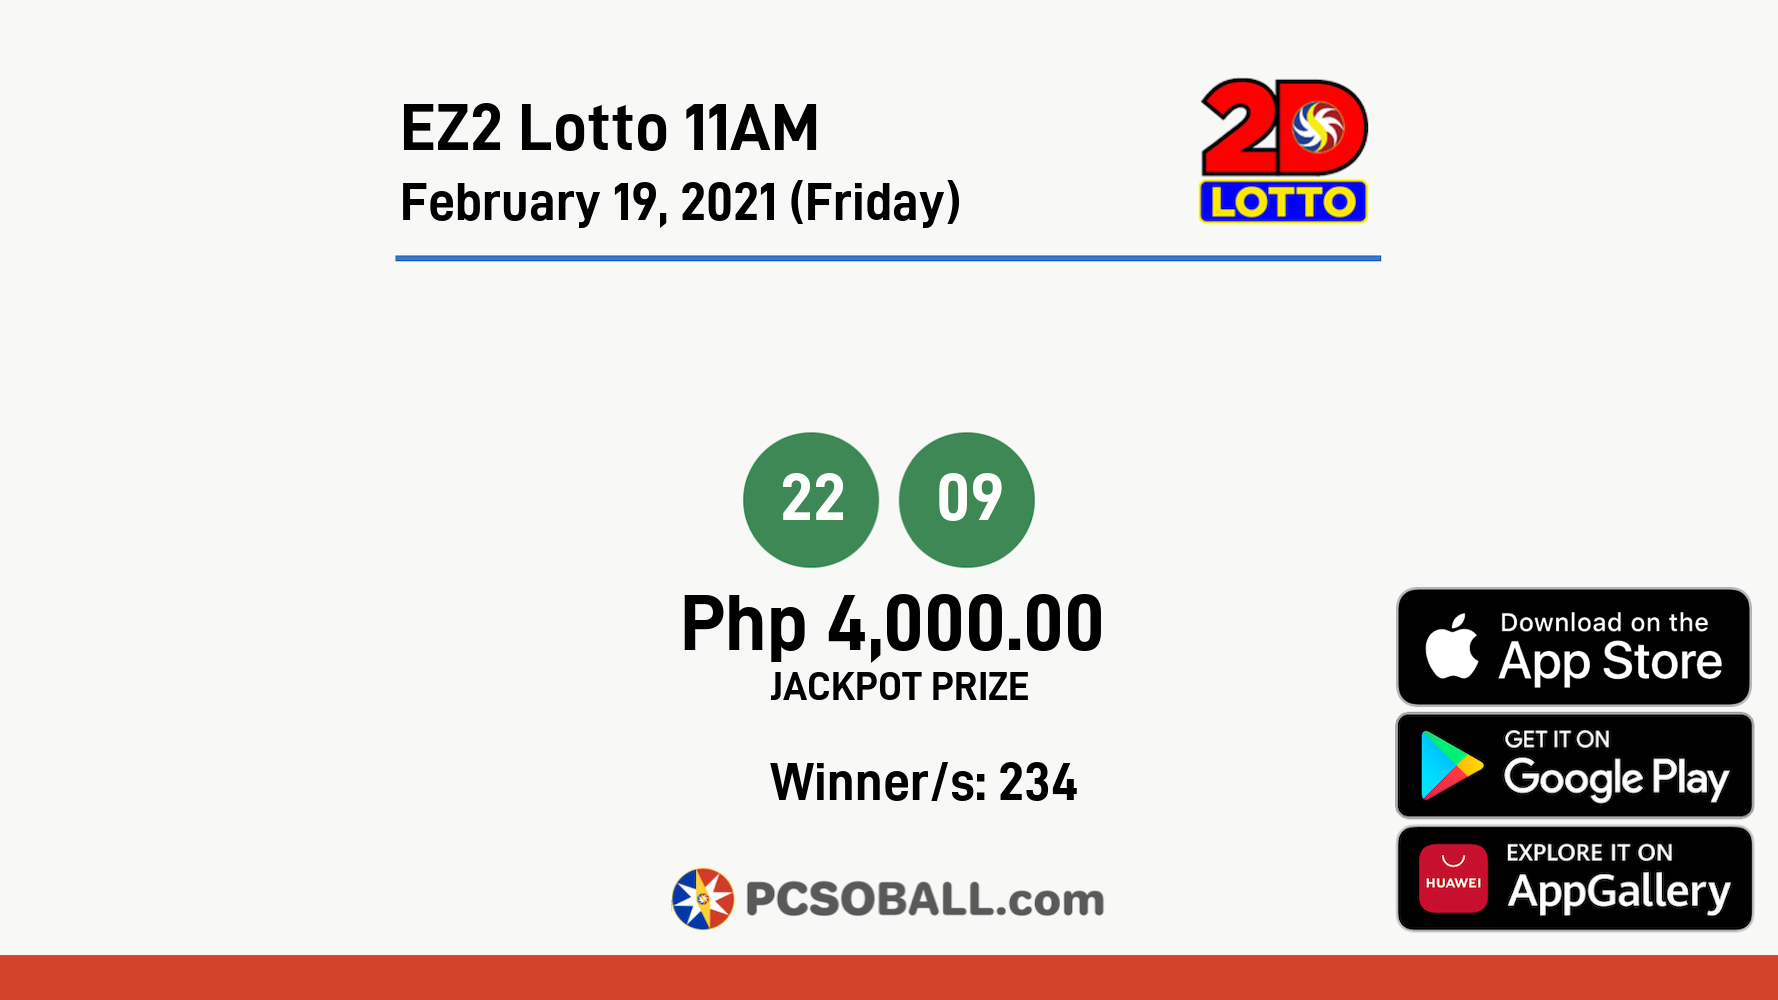 EZ2 Lotto 11AM February 19, 2021 (Friday) Result